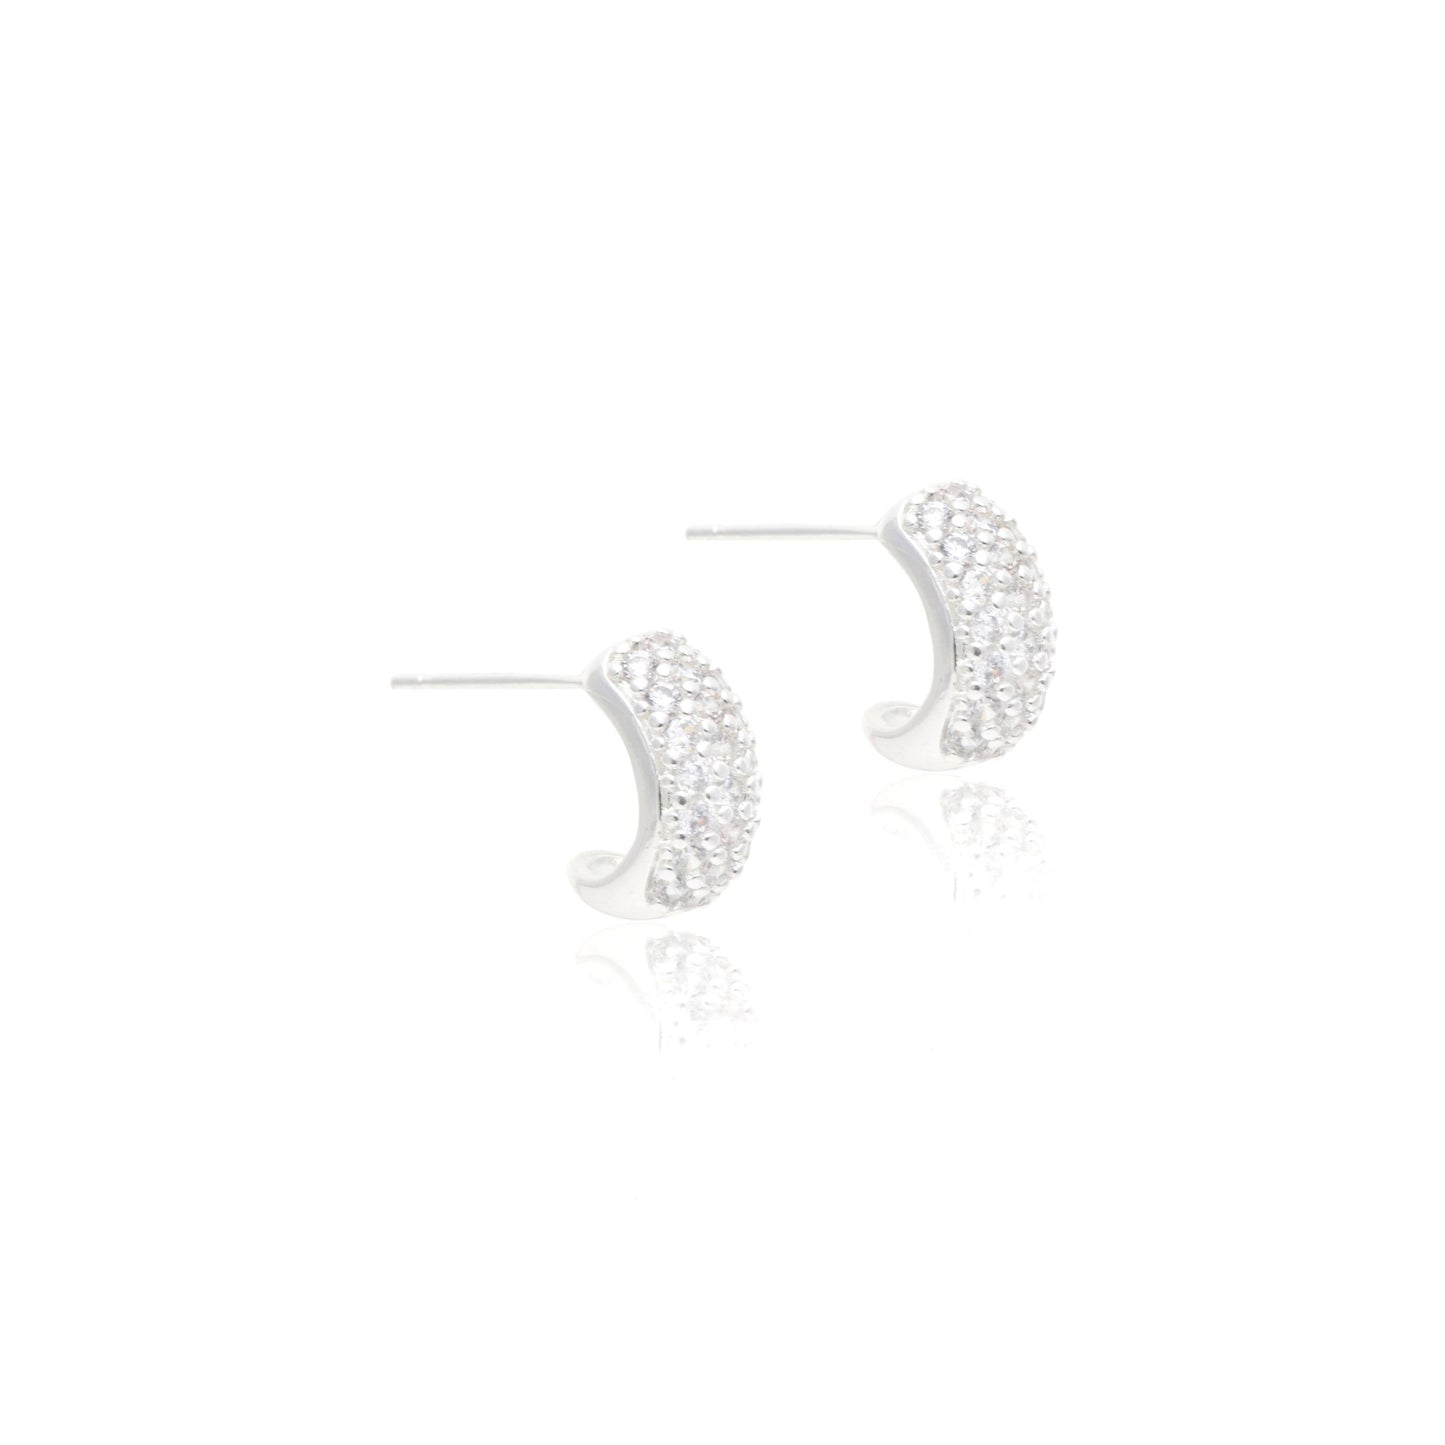 Hoop earring with white cubic zirconia